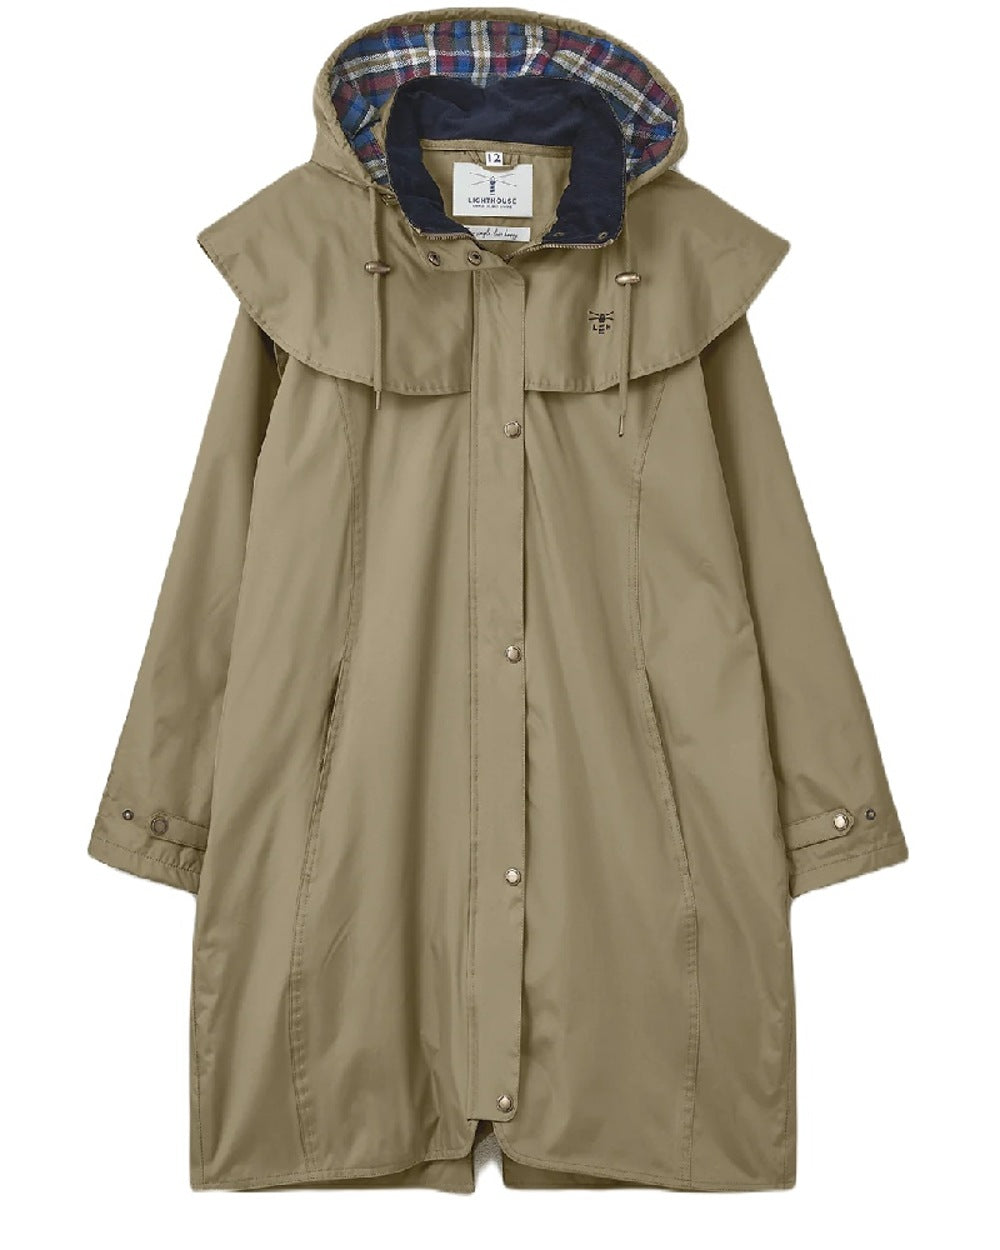 Lighthouse Outrider 3/4 Length Ladies Waterproof Raincoat in Fawn 